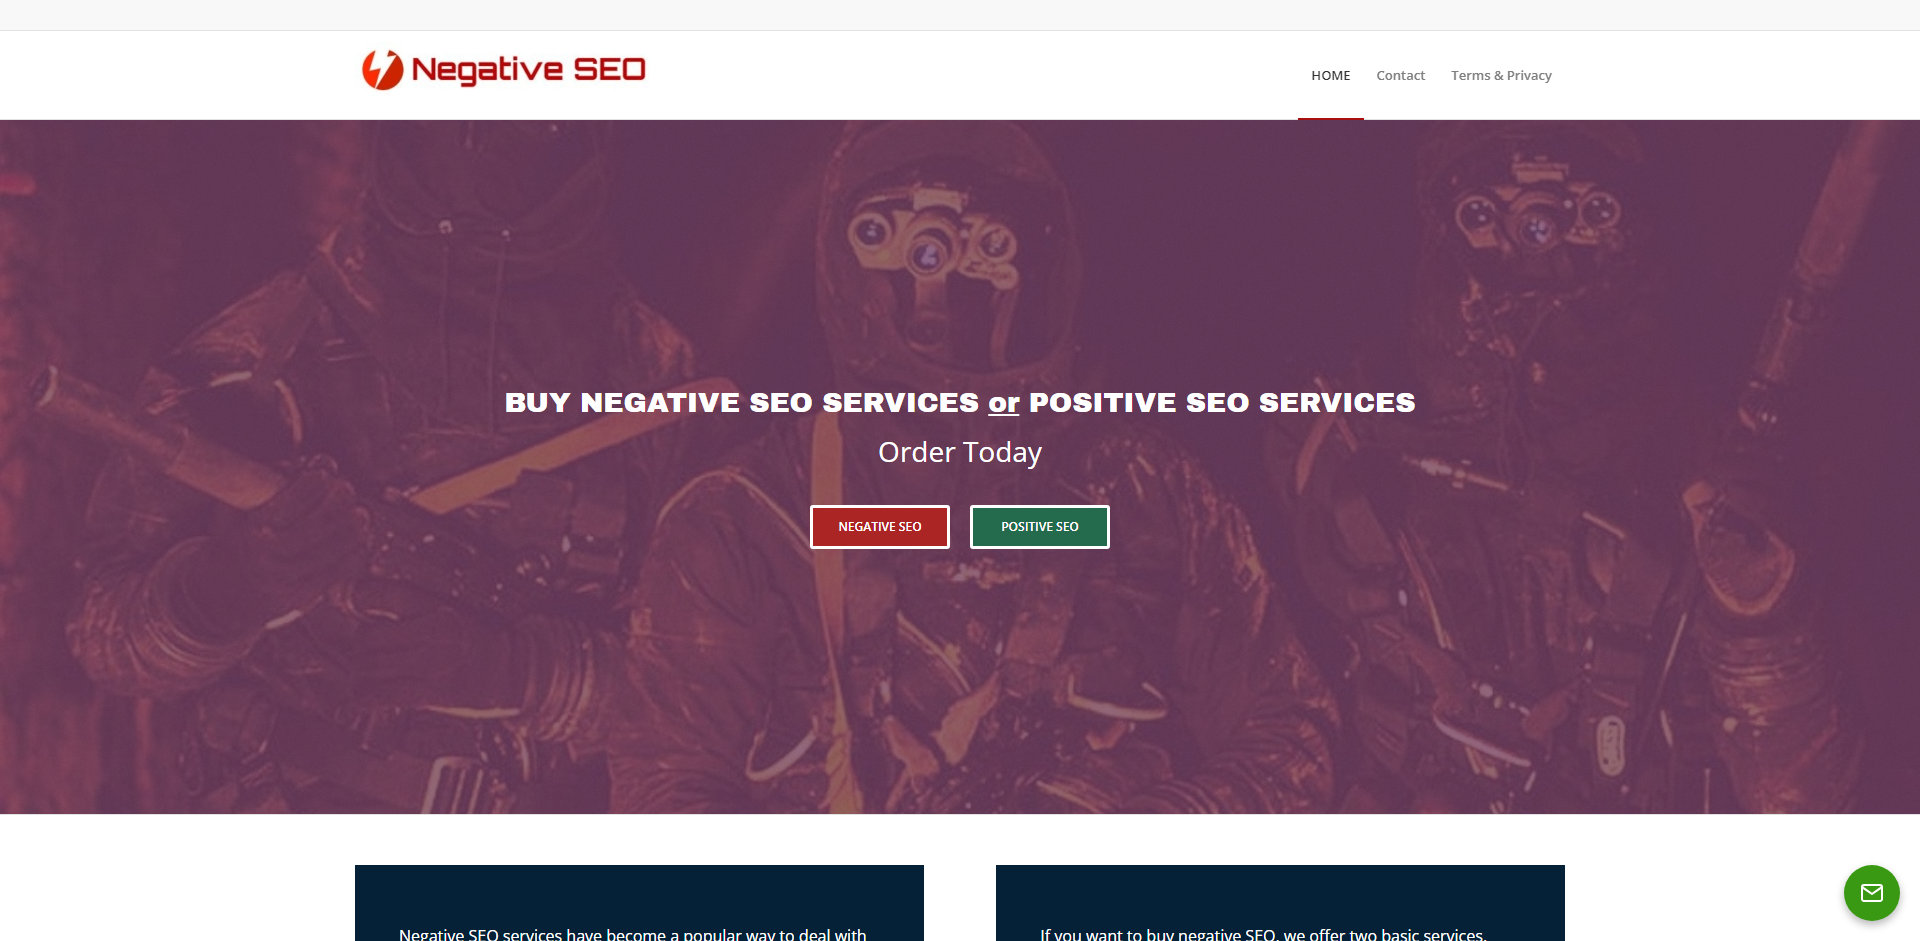 Negative SEO Services - Available for purchase